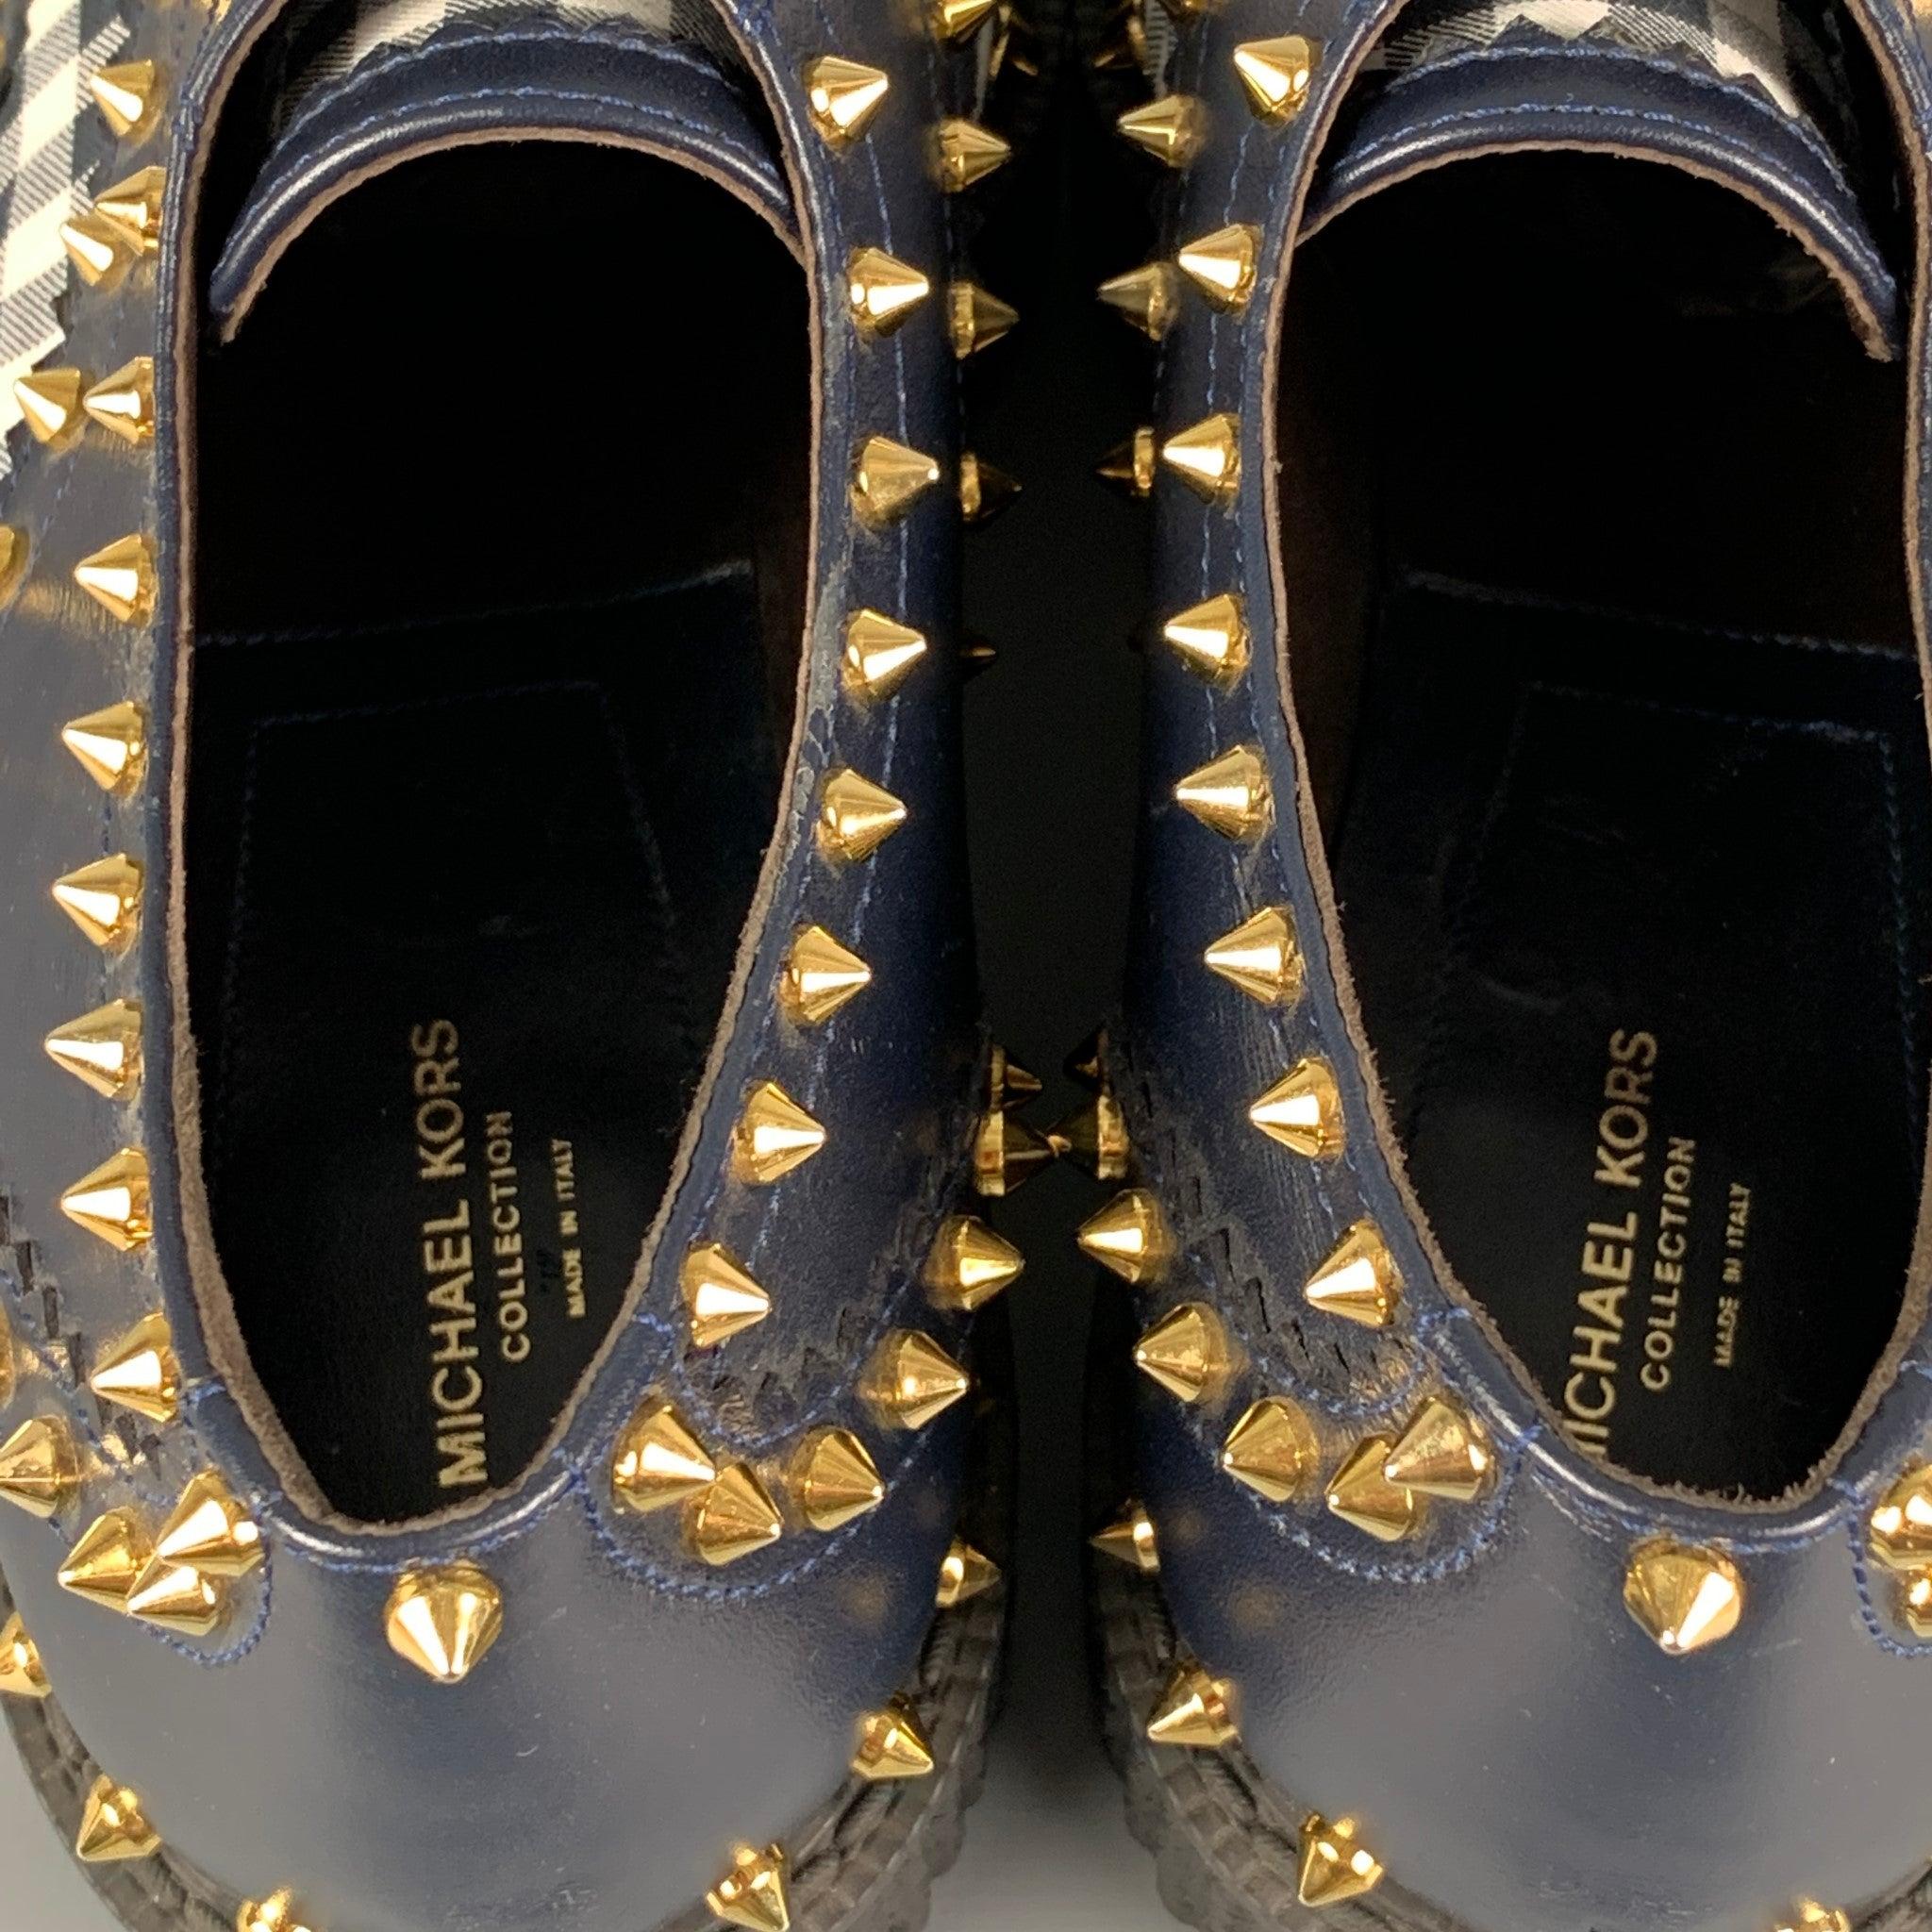 MICHAEL KORS Size 11 Navy White Leather Studded Platform Shoes For Sale 2